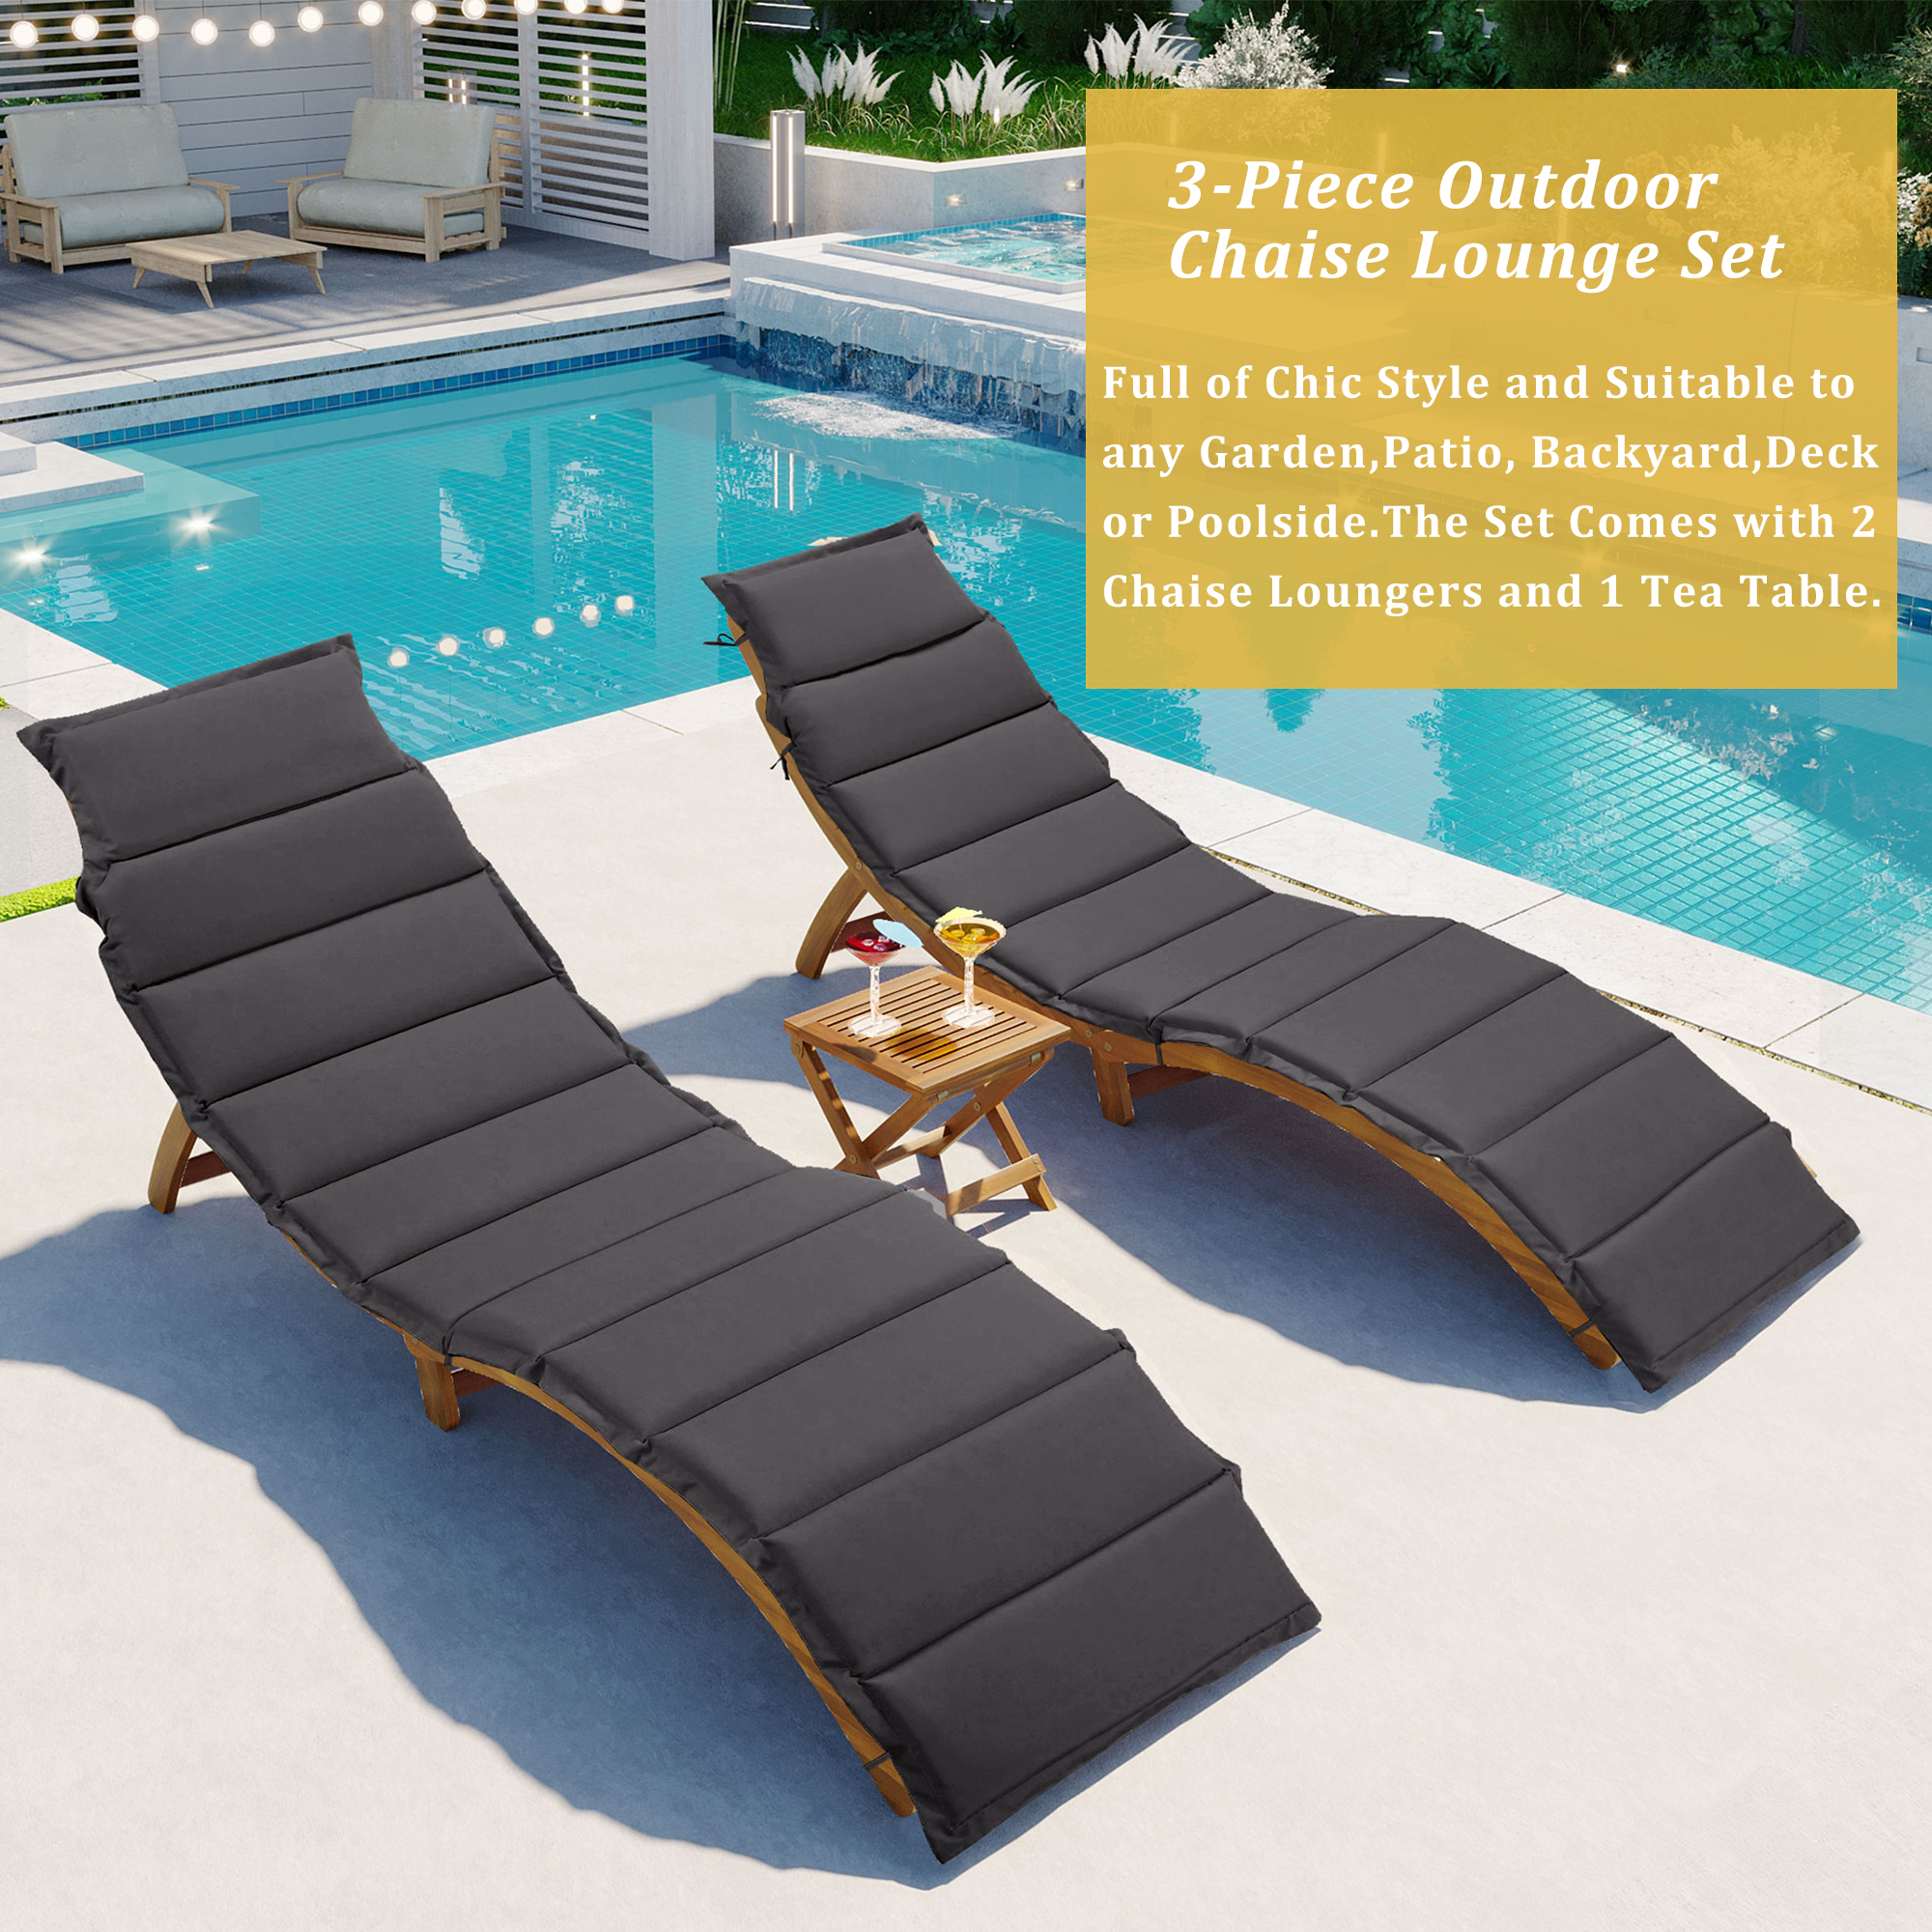 3 Pieces Outdoor Chaise Lounge Set, Wood Patio Furniture Set Extended, 2 Foldable Chaise Lounge Chair with 1 Table, Sun Lounger for Poolside Beach Patio, Brown Lounger + Gray Cushion - image 3 of 9